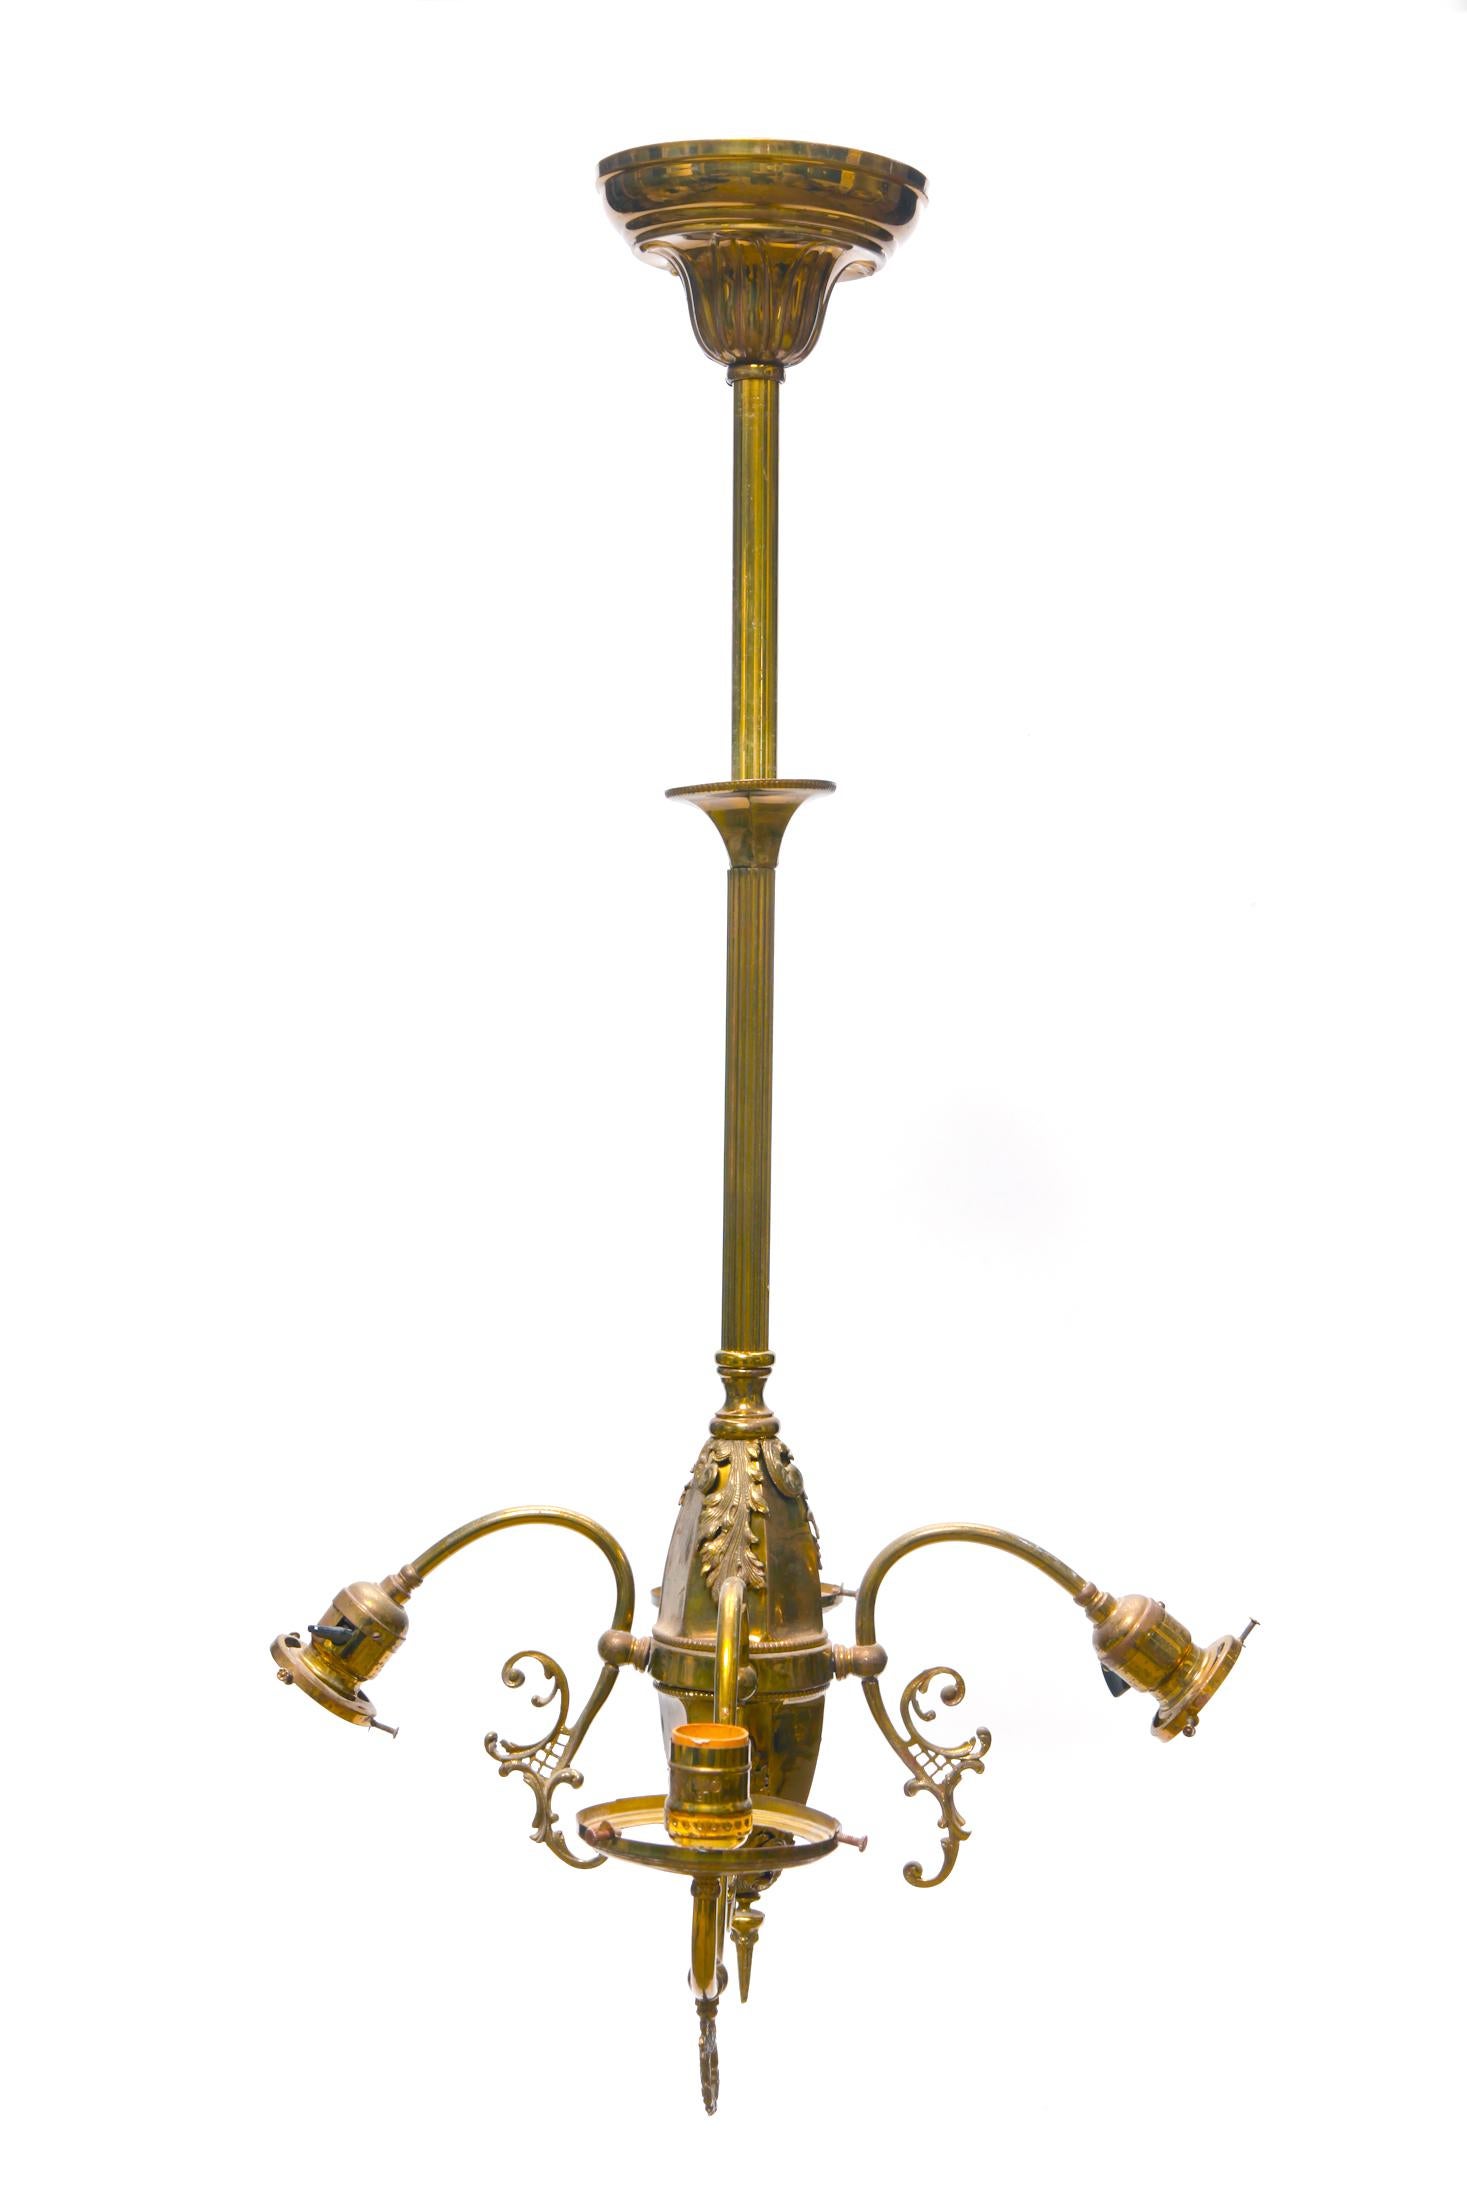 Antique light fixture, incomplete, with a high polished brass finish. 
Refined ornate details, Can be usable with some adaptation. No historical information is known about this rare and unusual piece. Original Canopy is included, some elements of